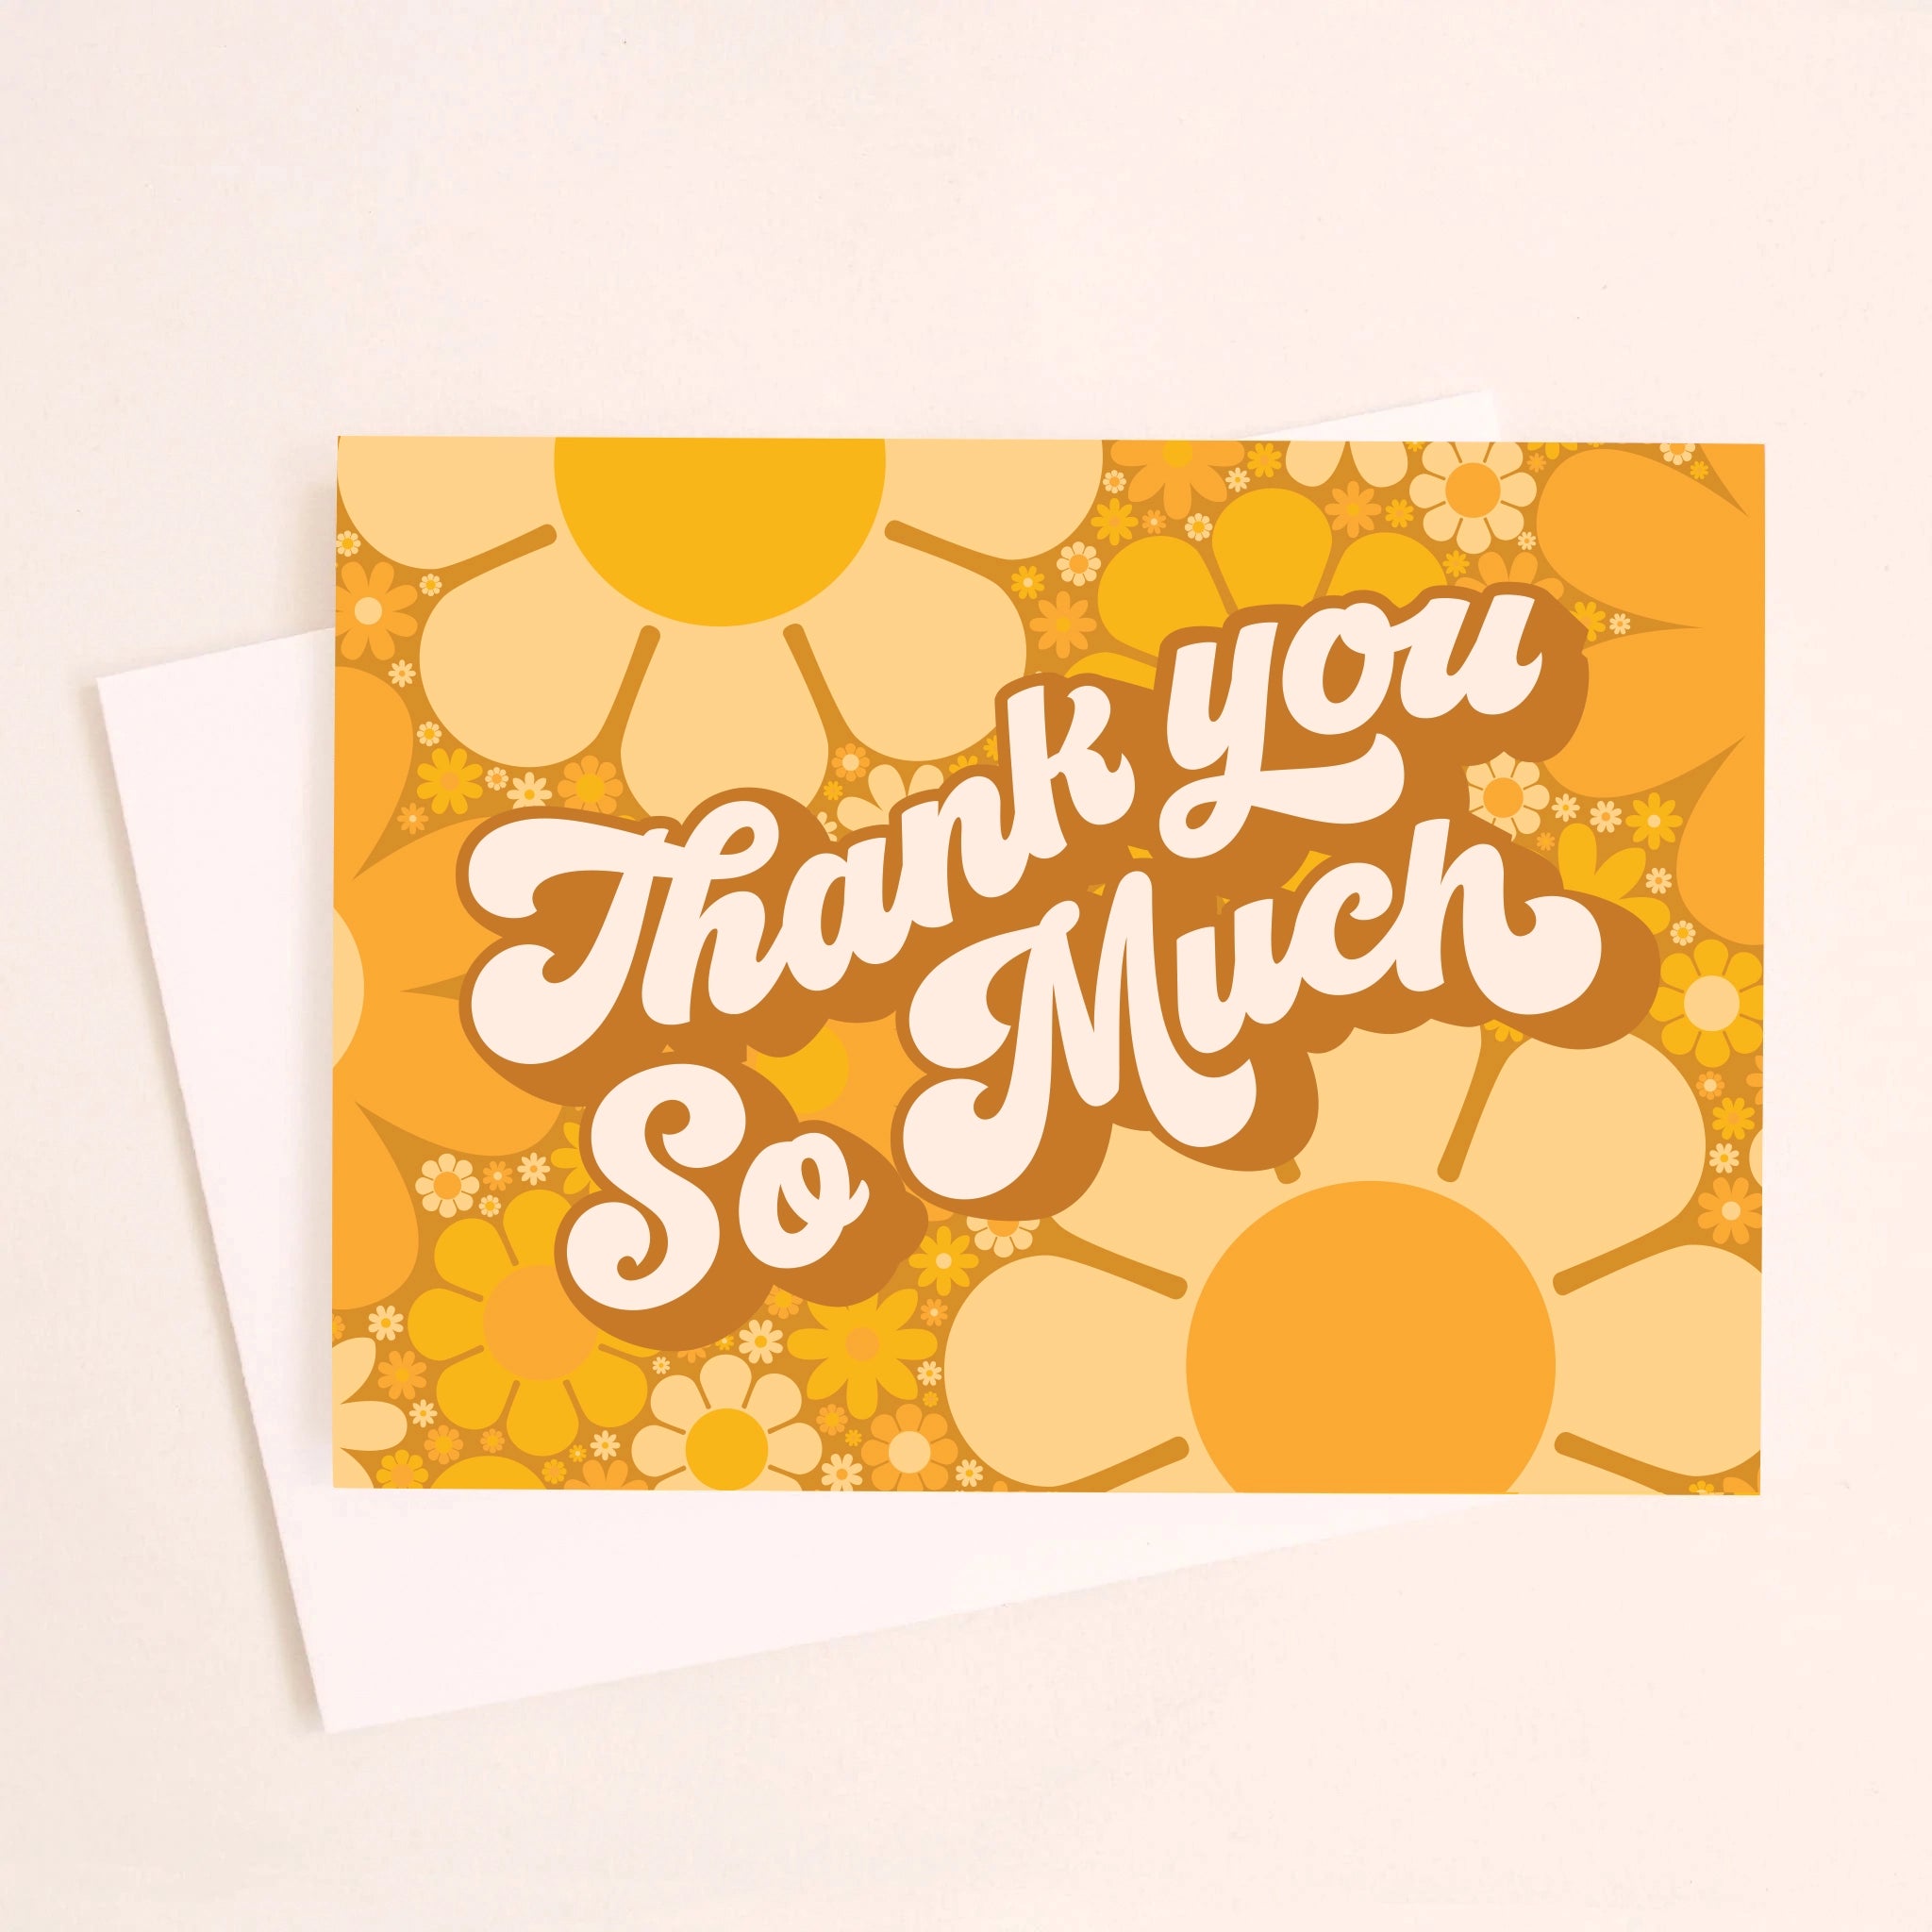 On an ivory background is a daisy printed thank you card with shades of orange and yellow along with white text in the center that reads, &quot;Thank You So Much&quot;.